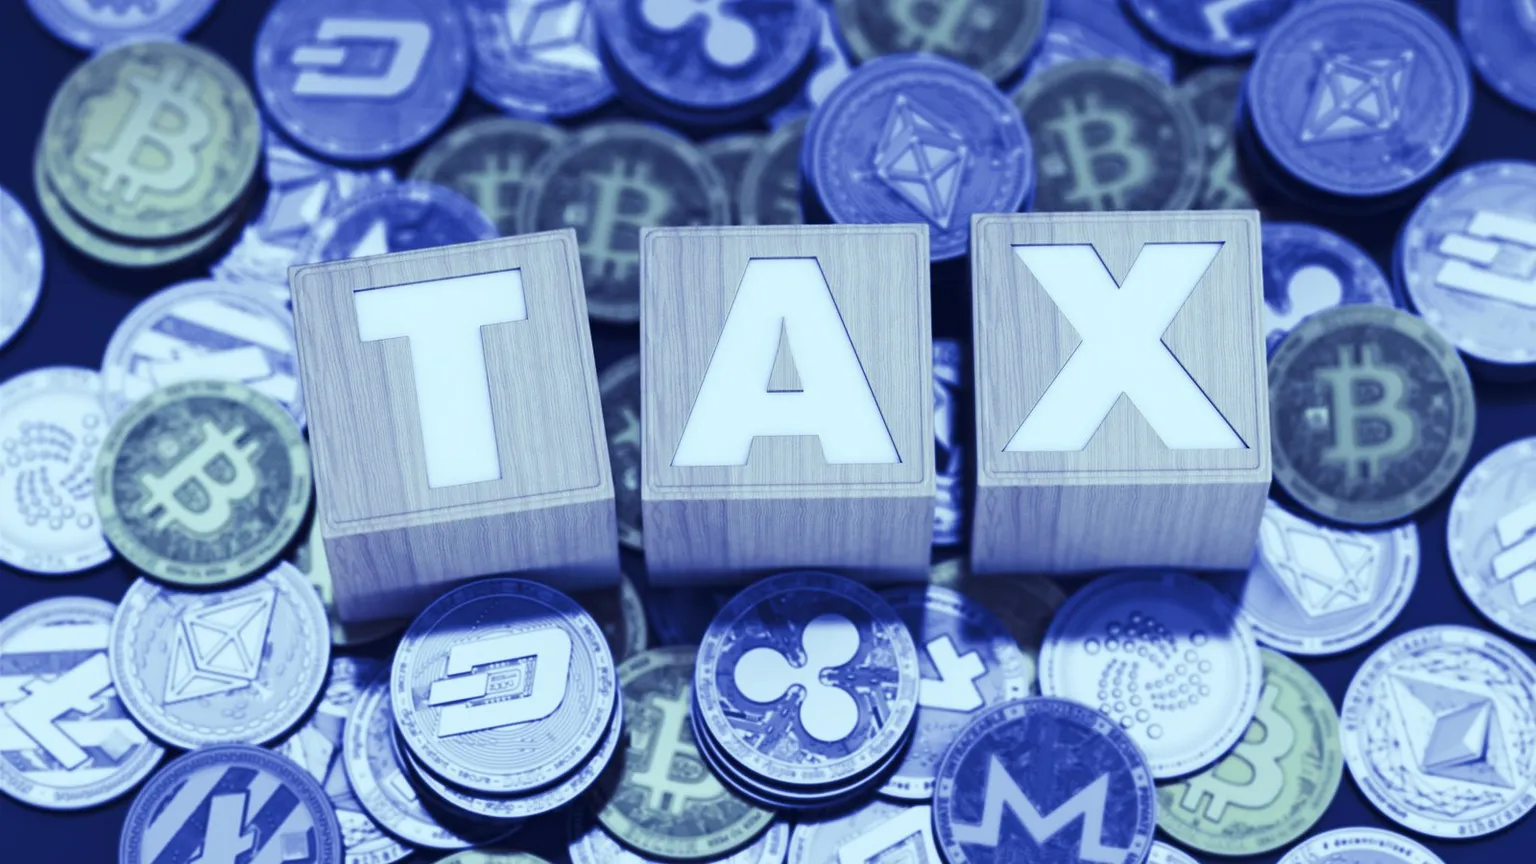 Crypto and taxes. Image: Shutterstock